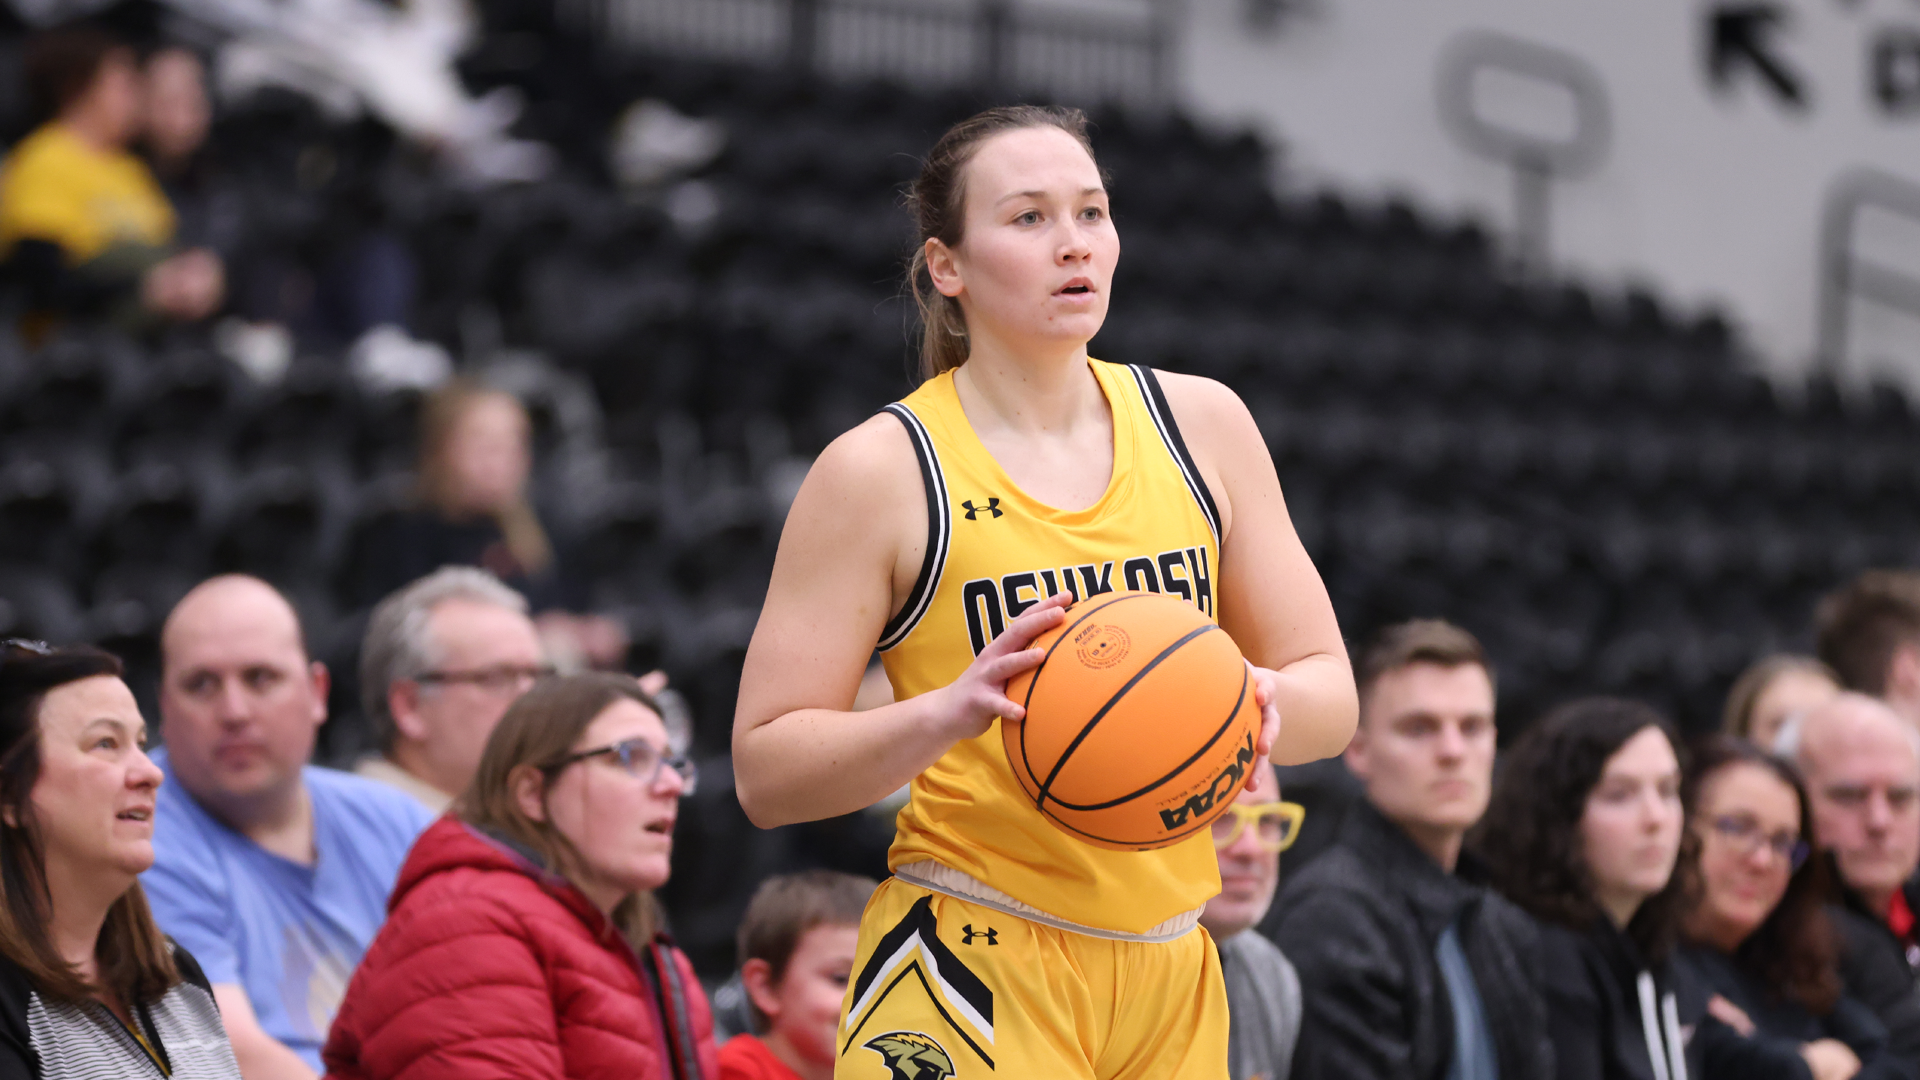 Bridget Froehlke scored 16 points in the Titans' upset of the Blue Devils on Saturday afternoon